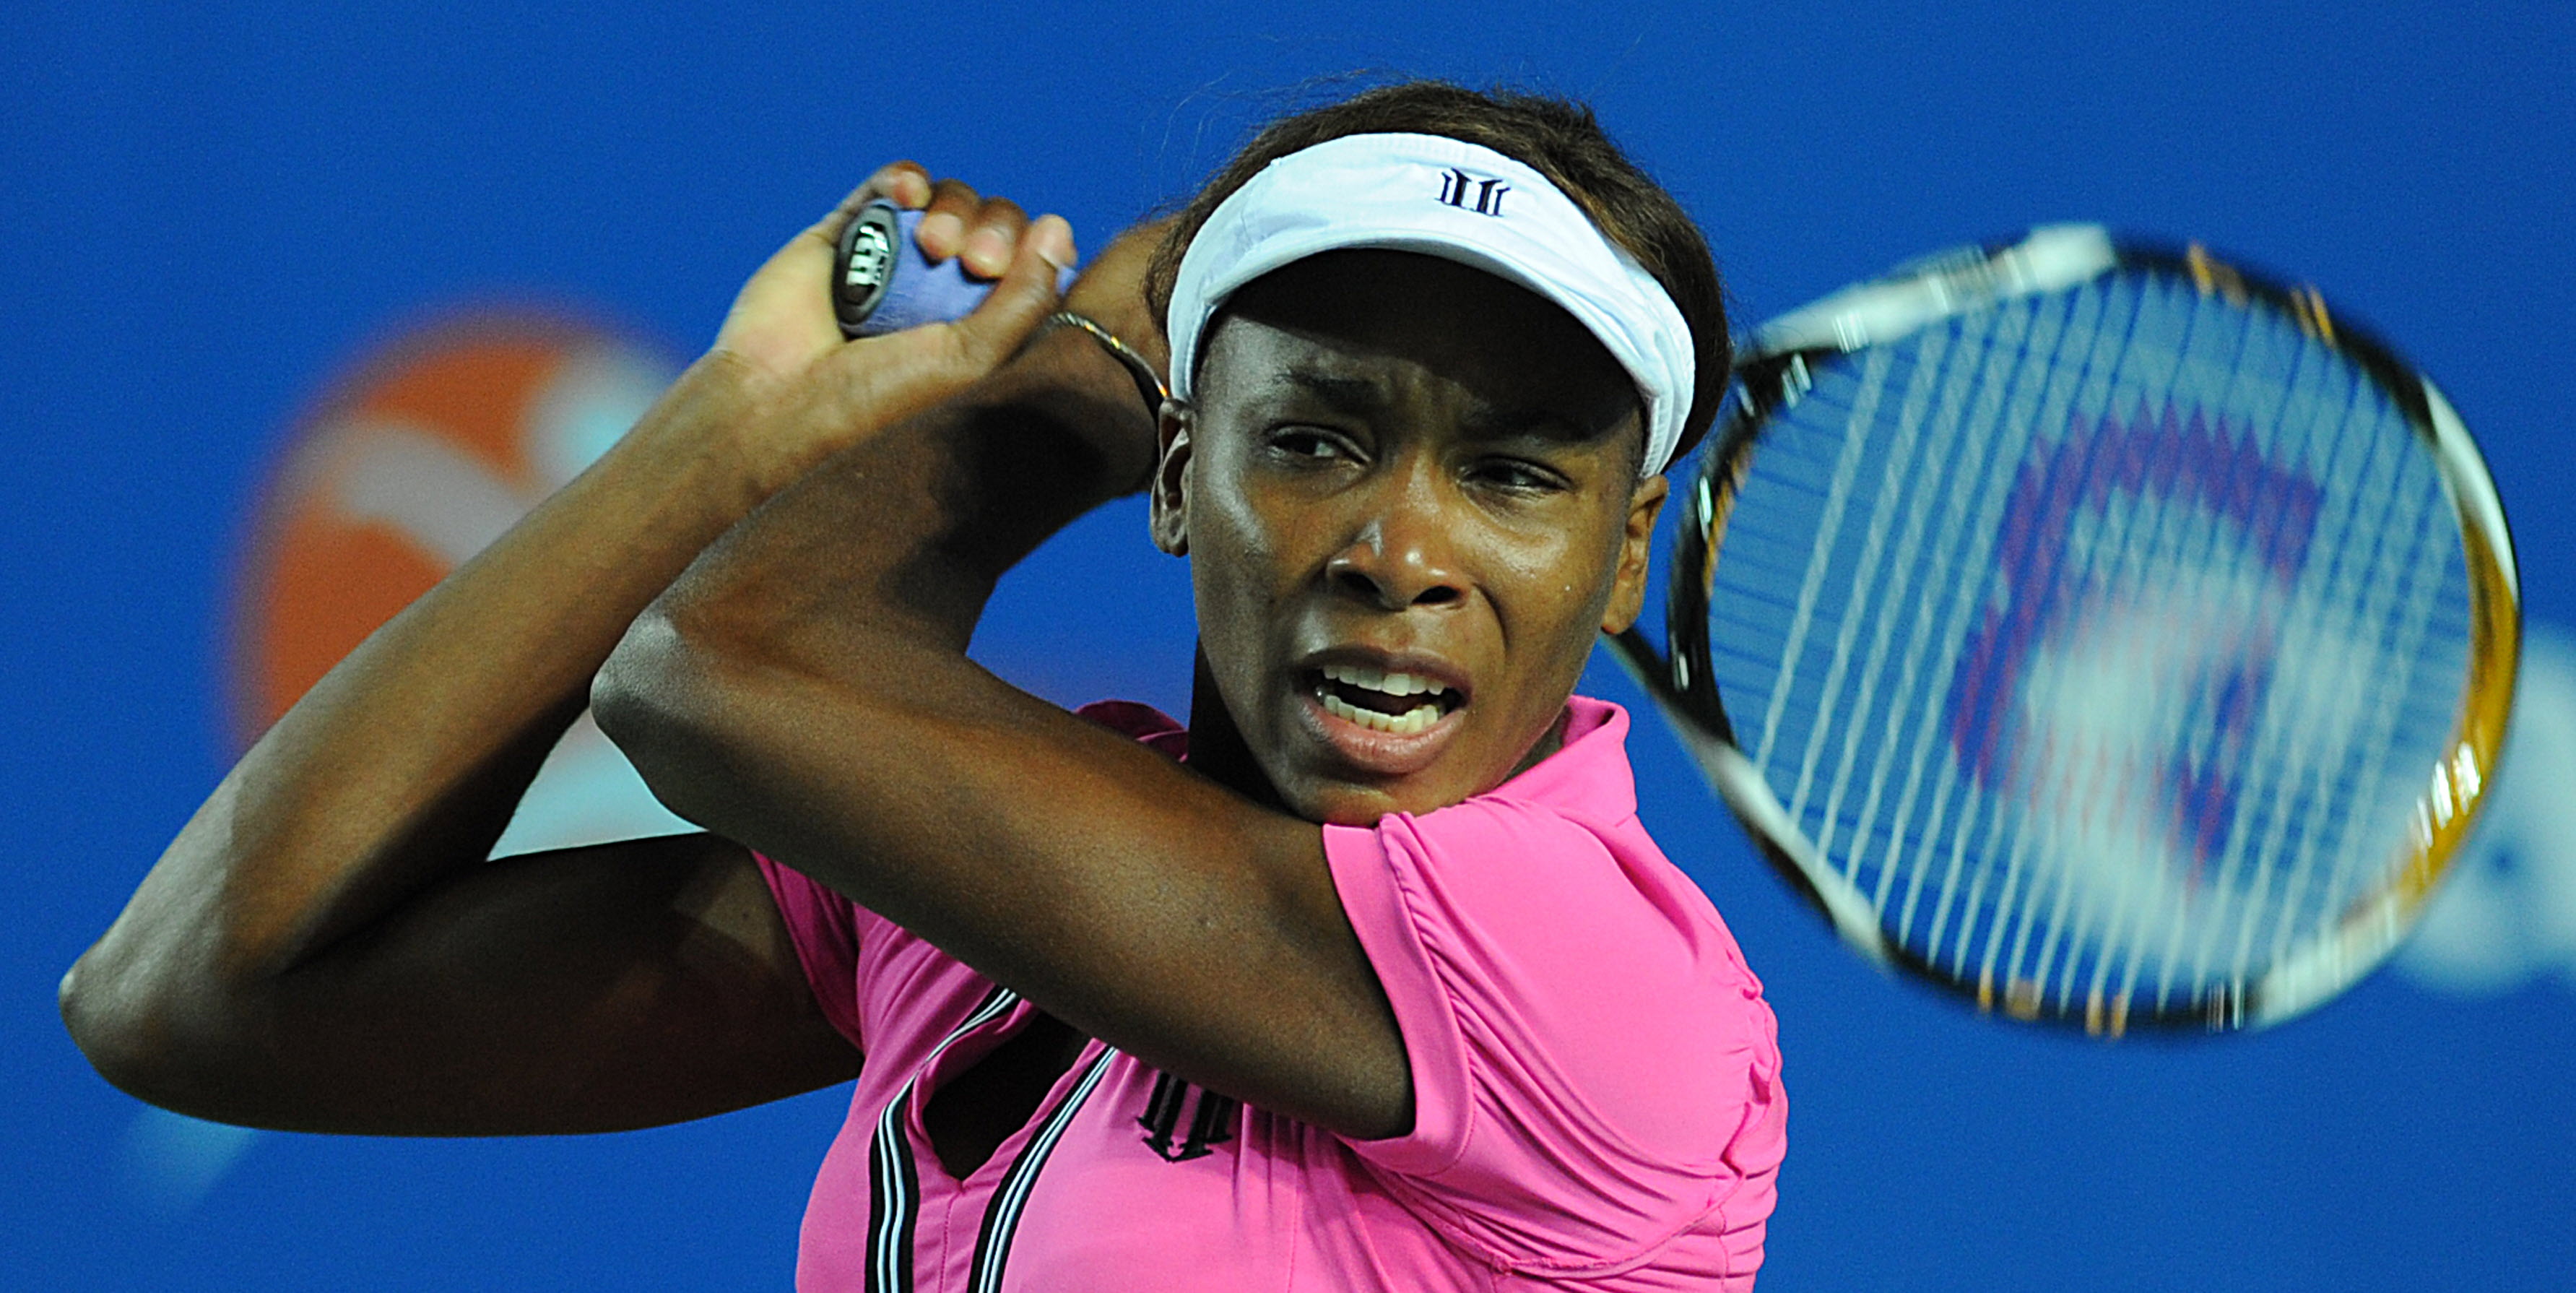 Venus Williams has played in Hong Kong many times and will return for the Prudential Hong Kong Open as organisers embark on lifting the game's profile again. Photo: AFP